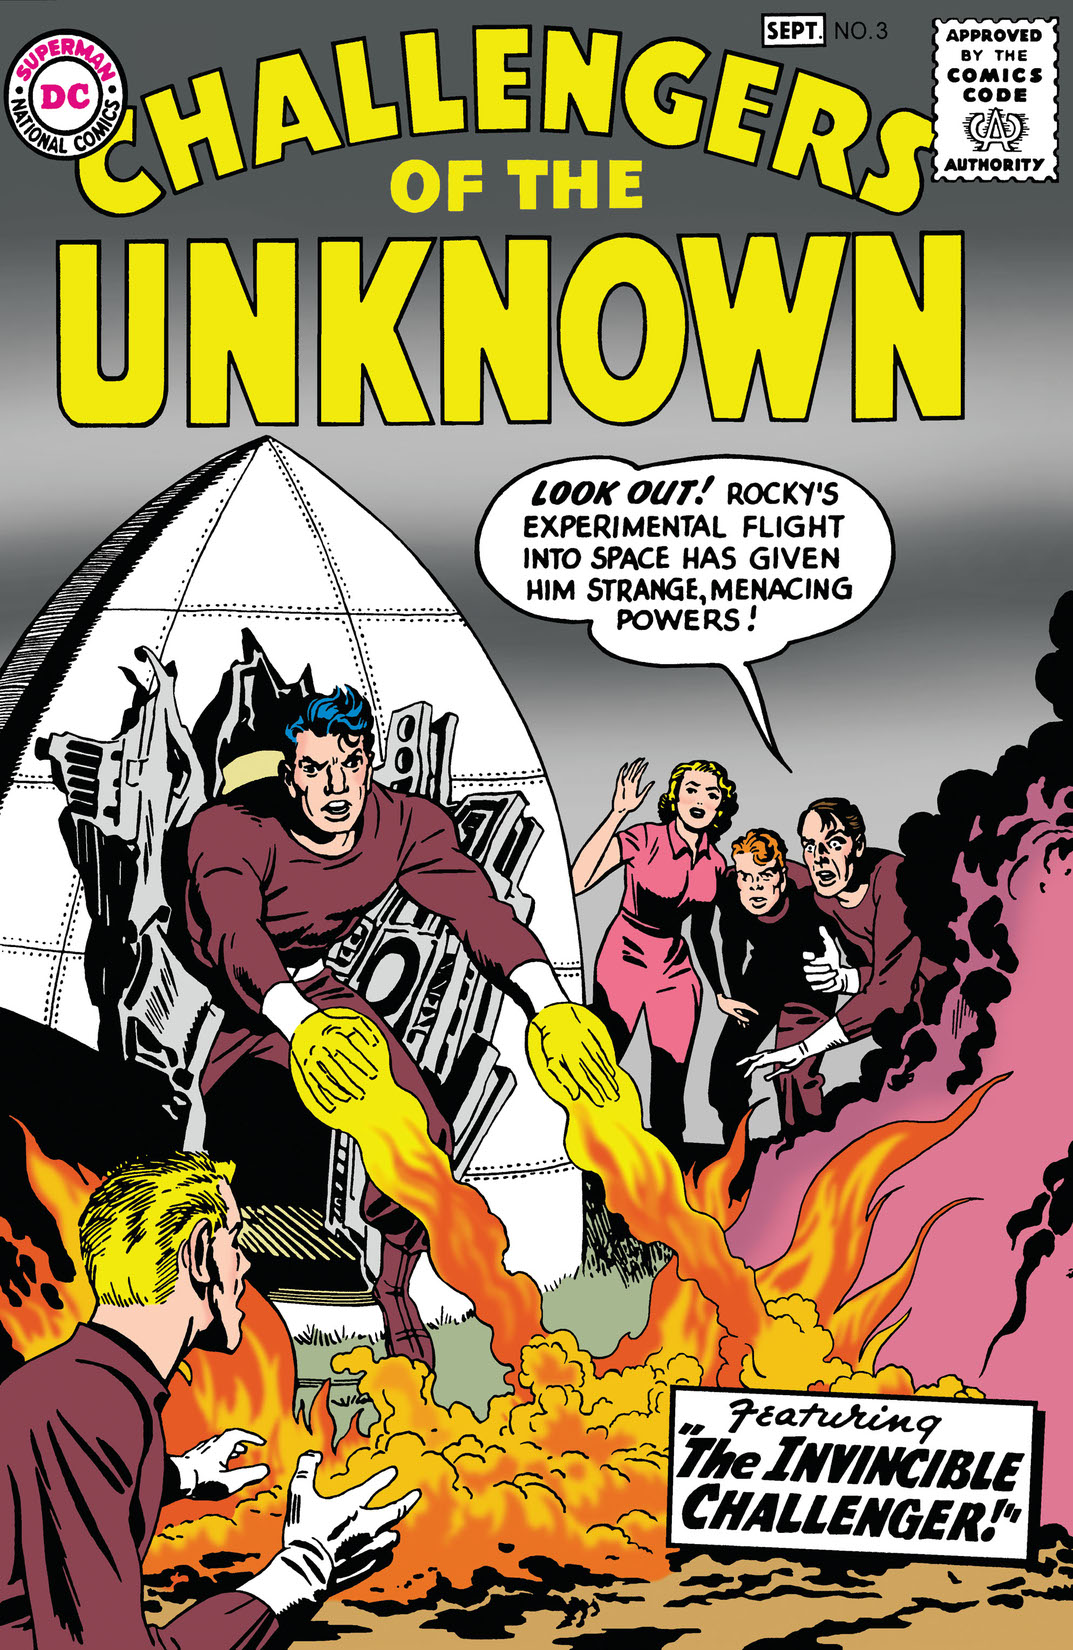 Challengers of the Unknown (1958-) #3 preview images